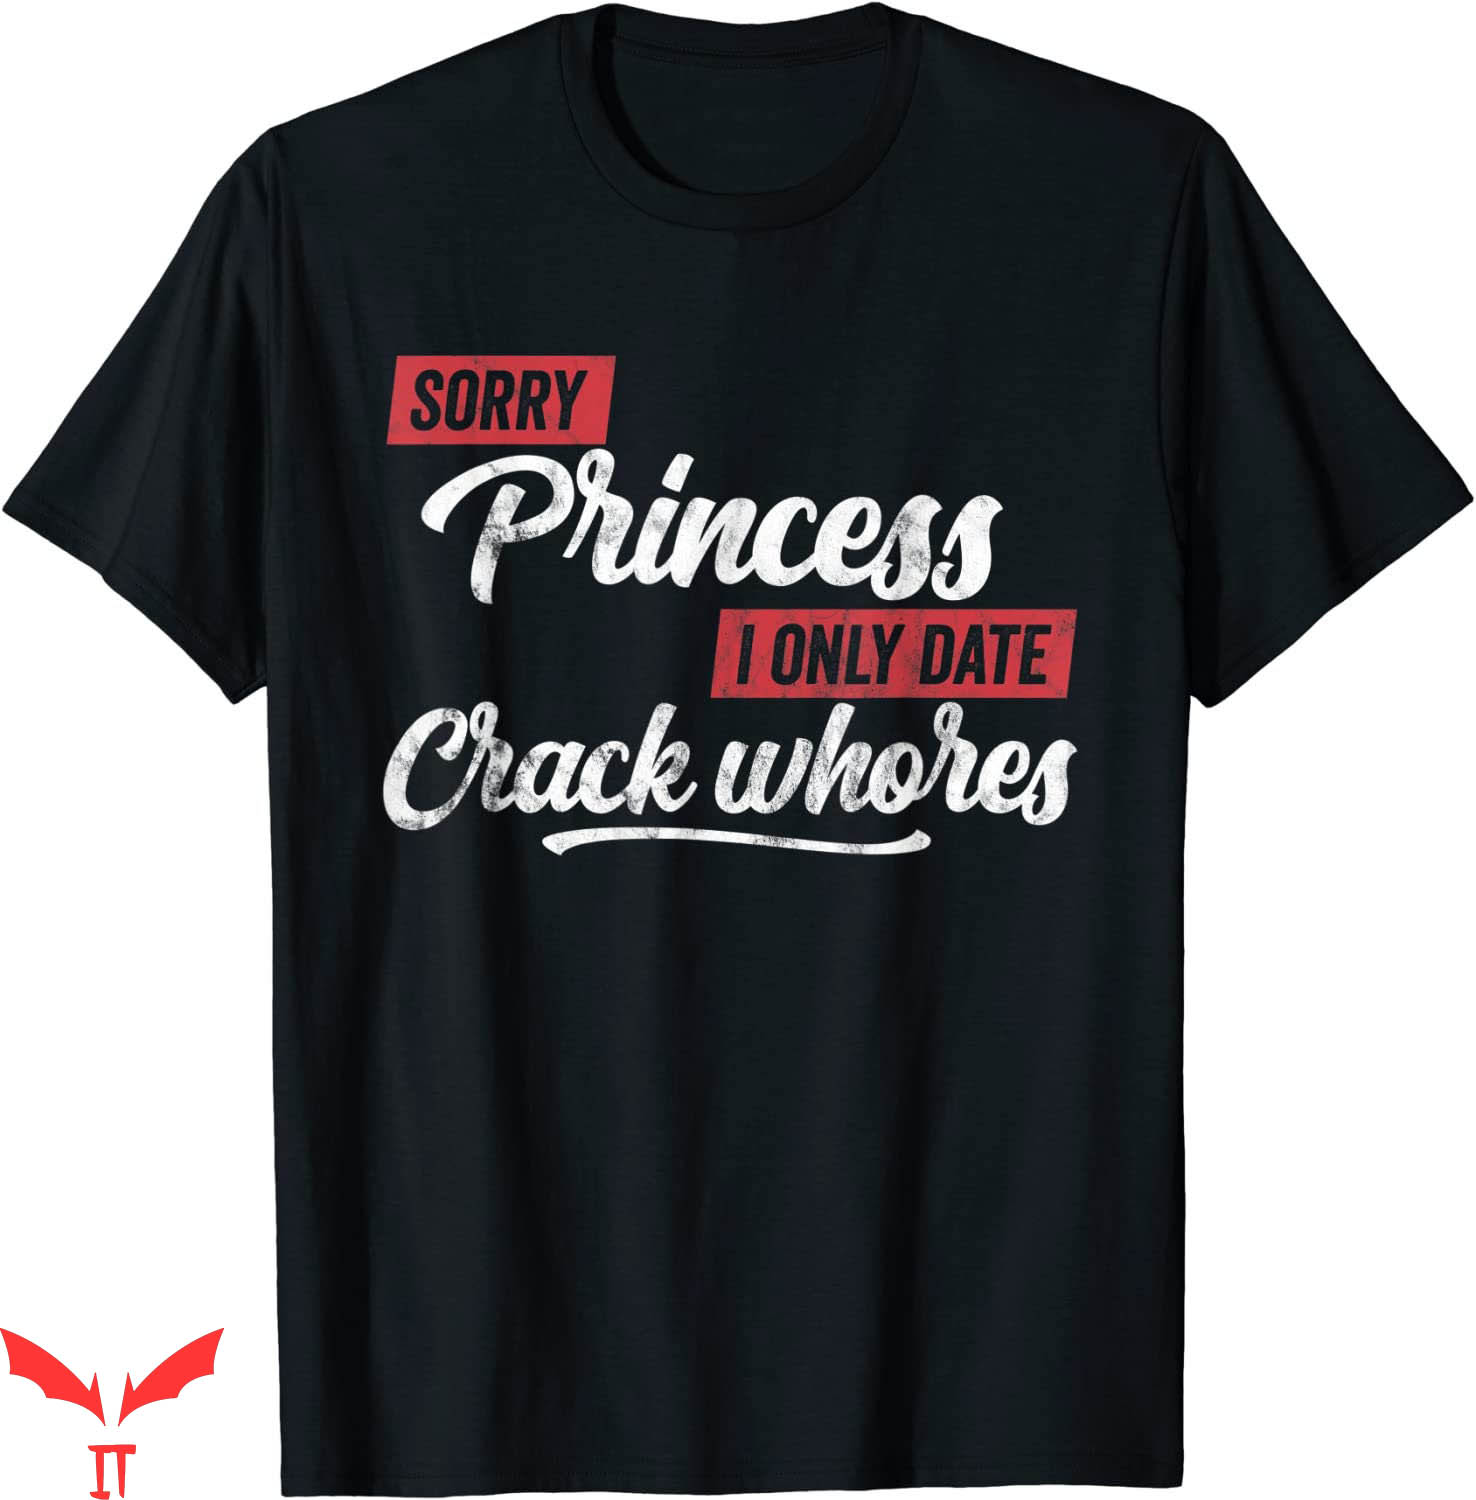 Sorry Princess I Only Date T-Shirt Funny Quote Design Tee